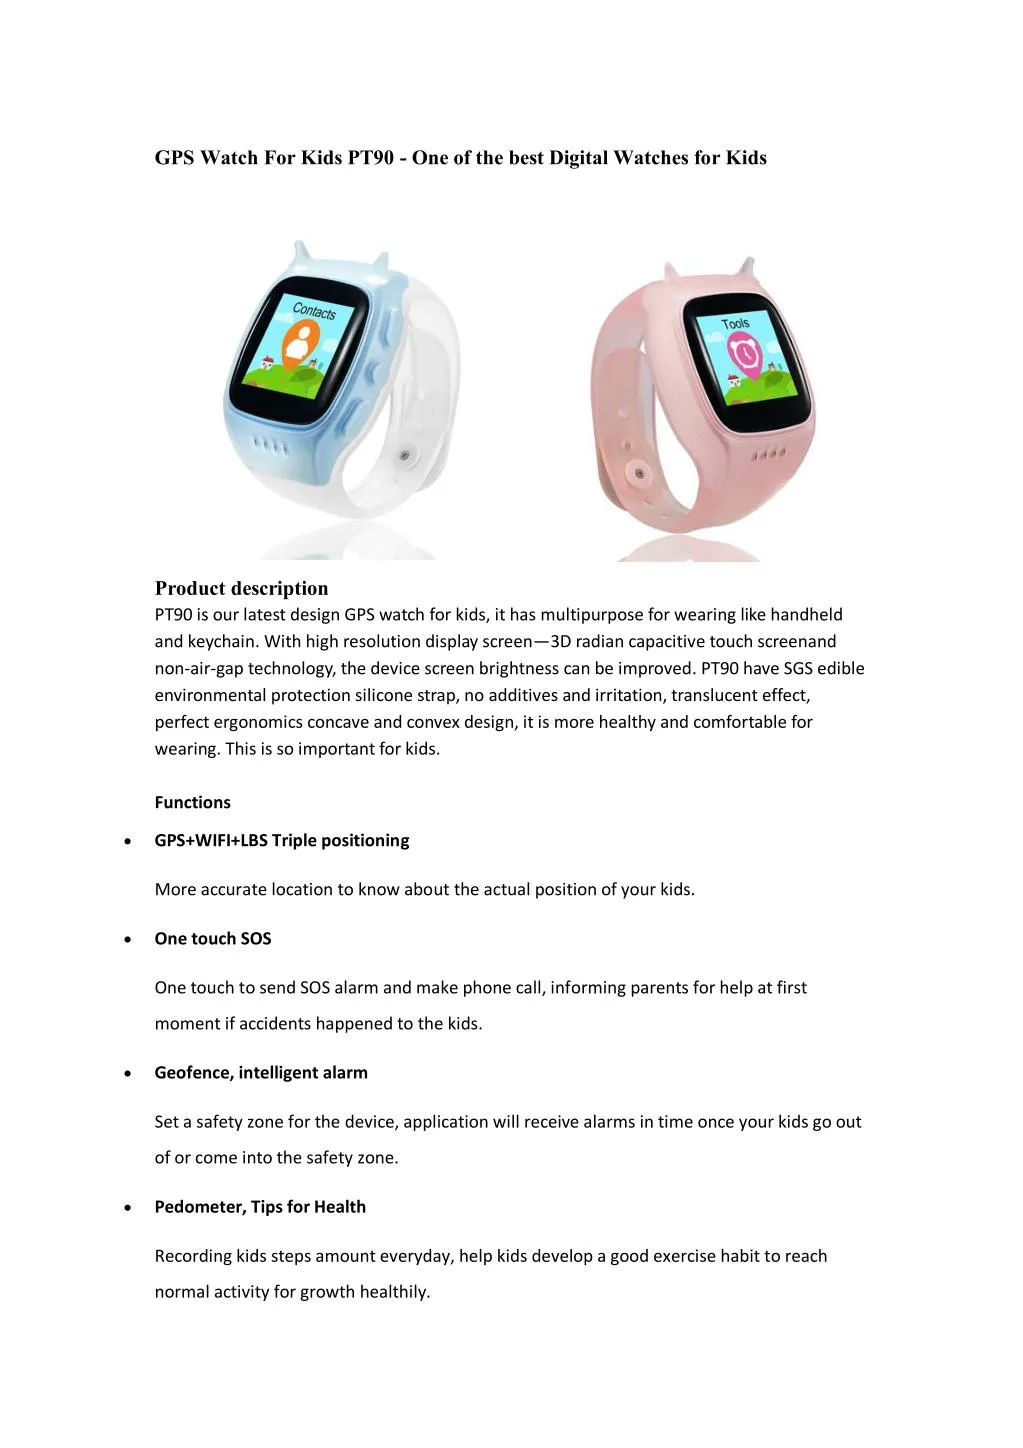 gps watch for kids pt90 one of the best digital